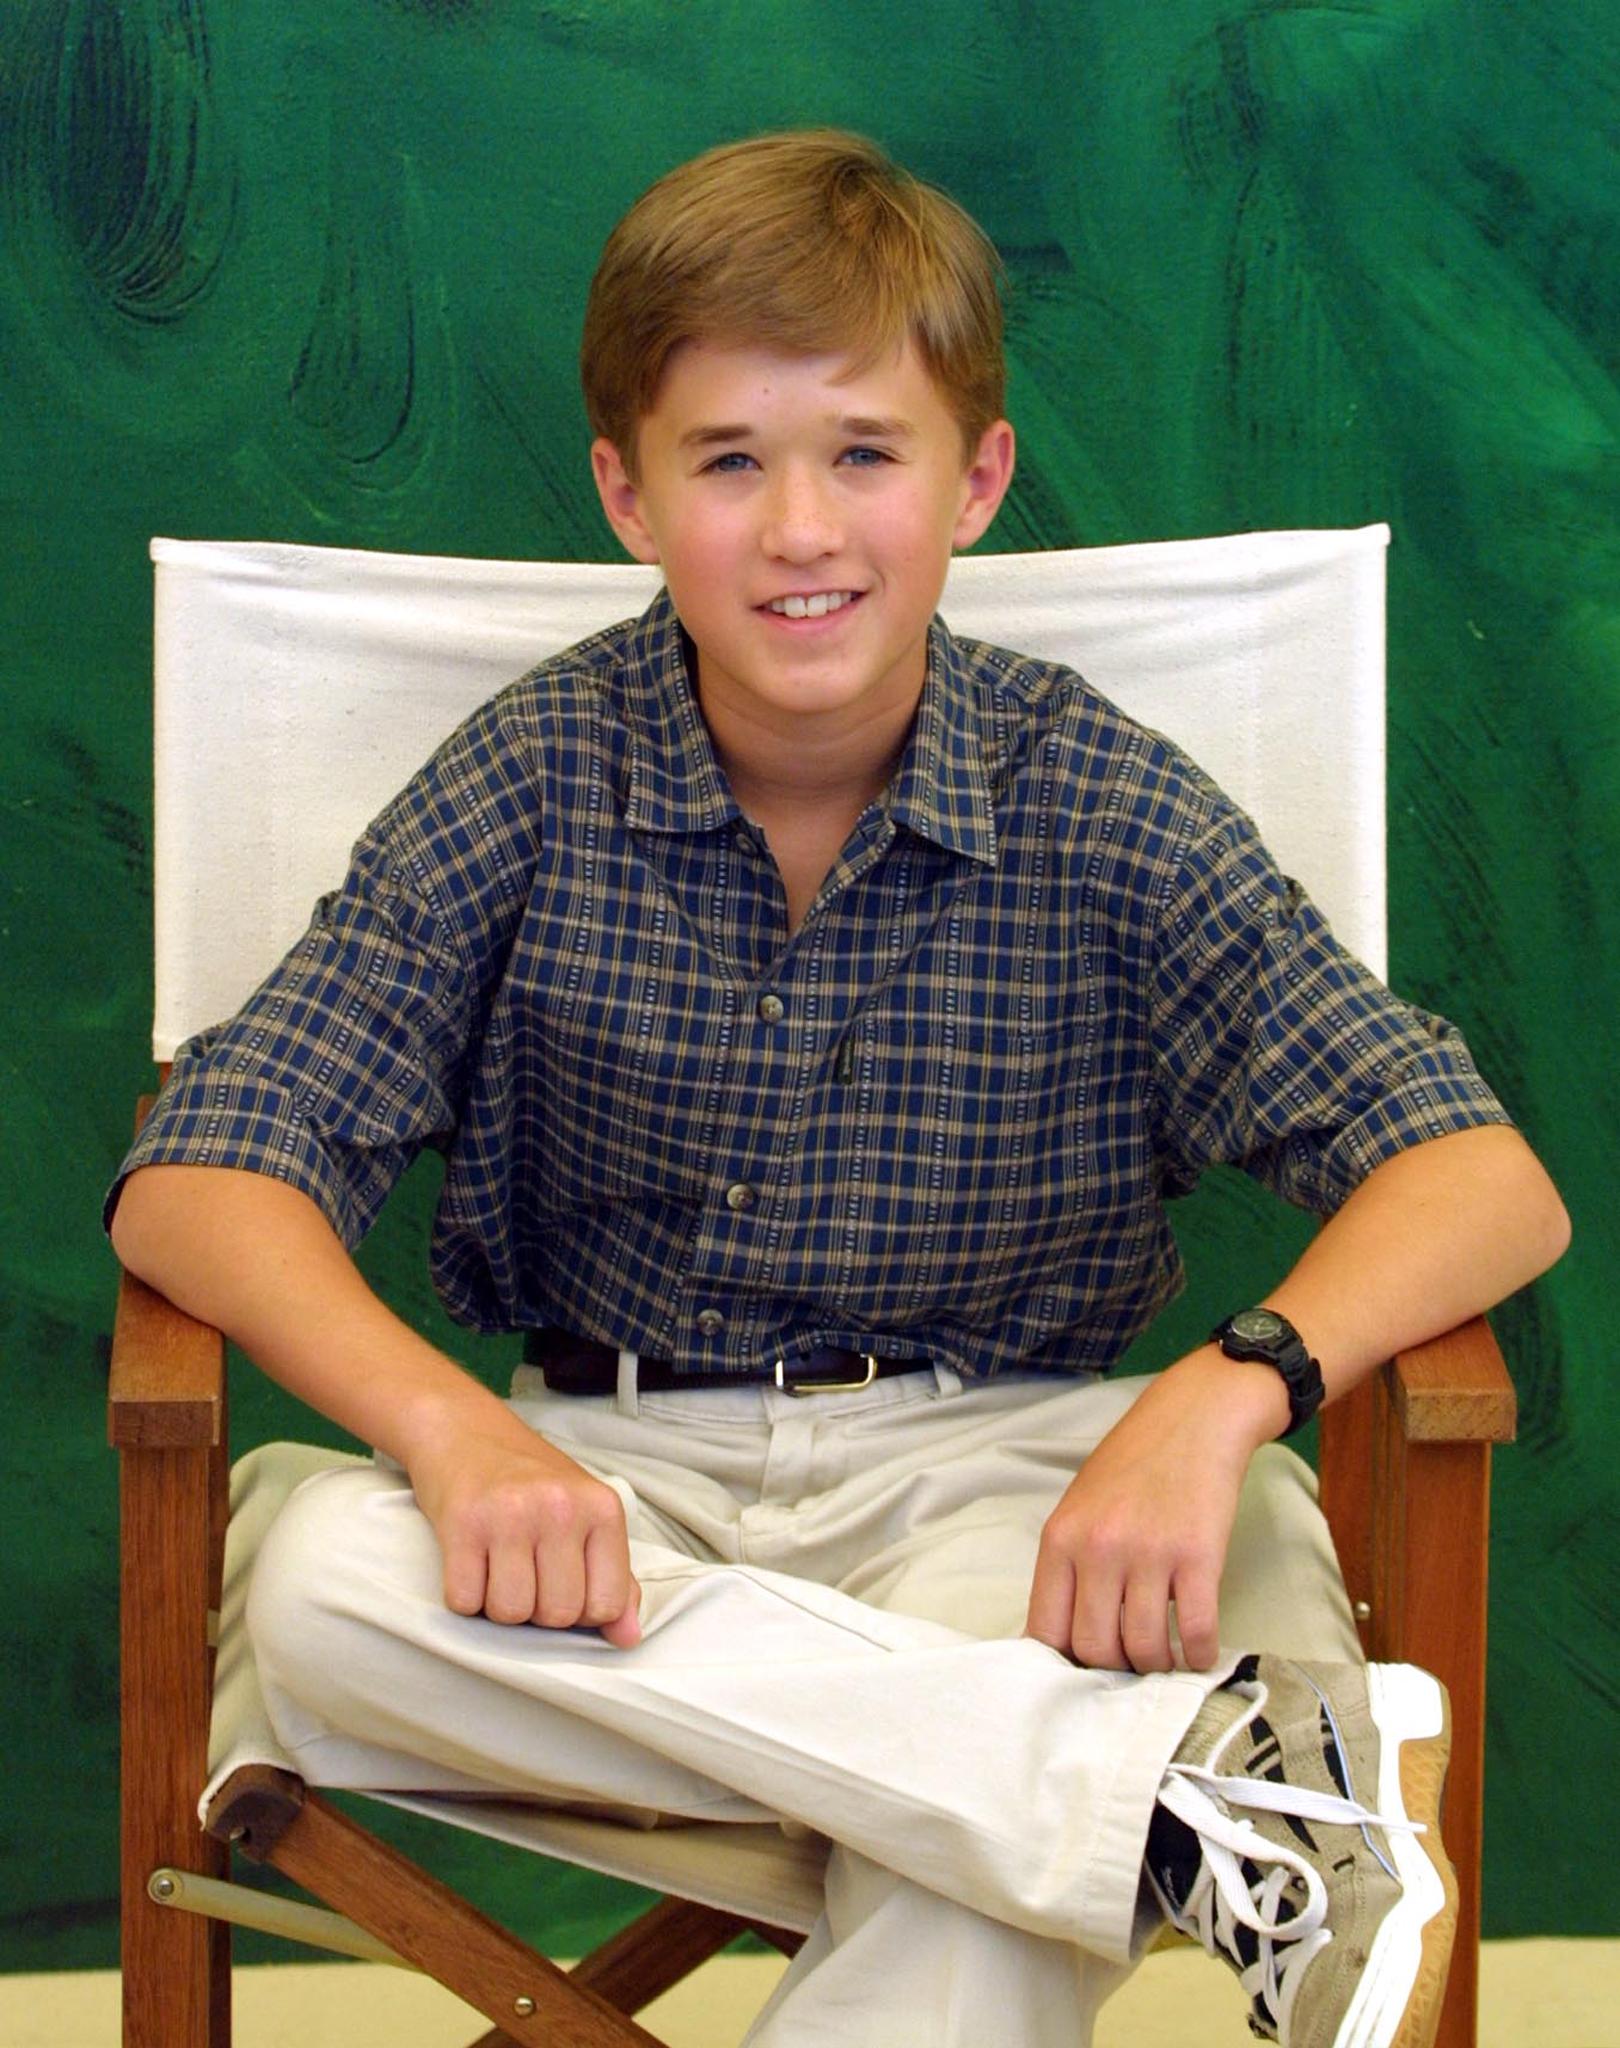 Haley Joel Osment during photocall at the 58th International Film Festival on September 6, 2001. | Source: Getty Images